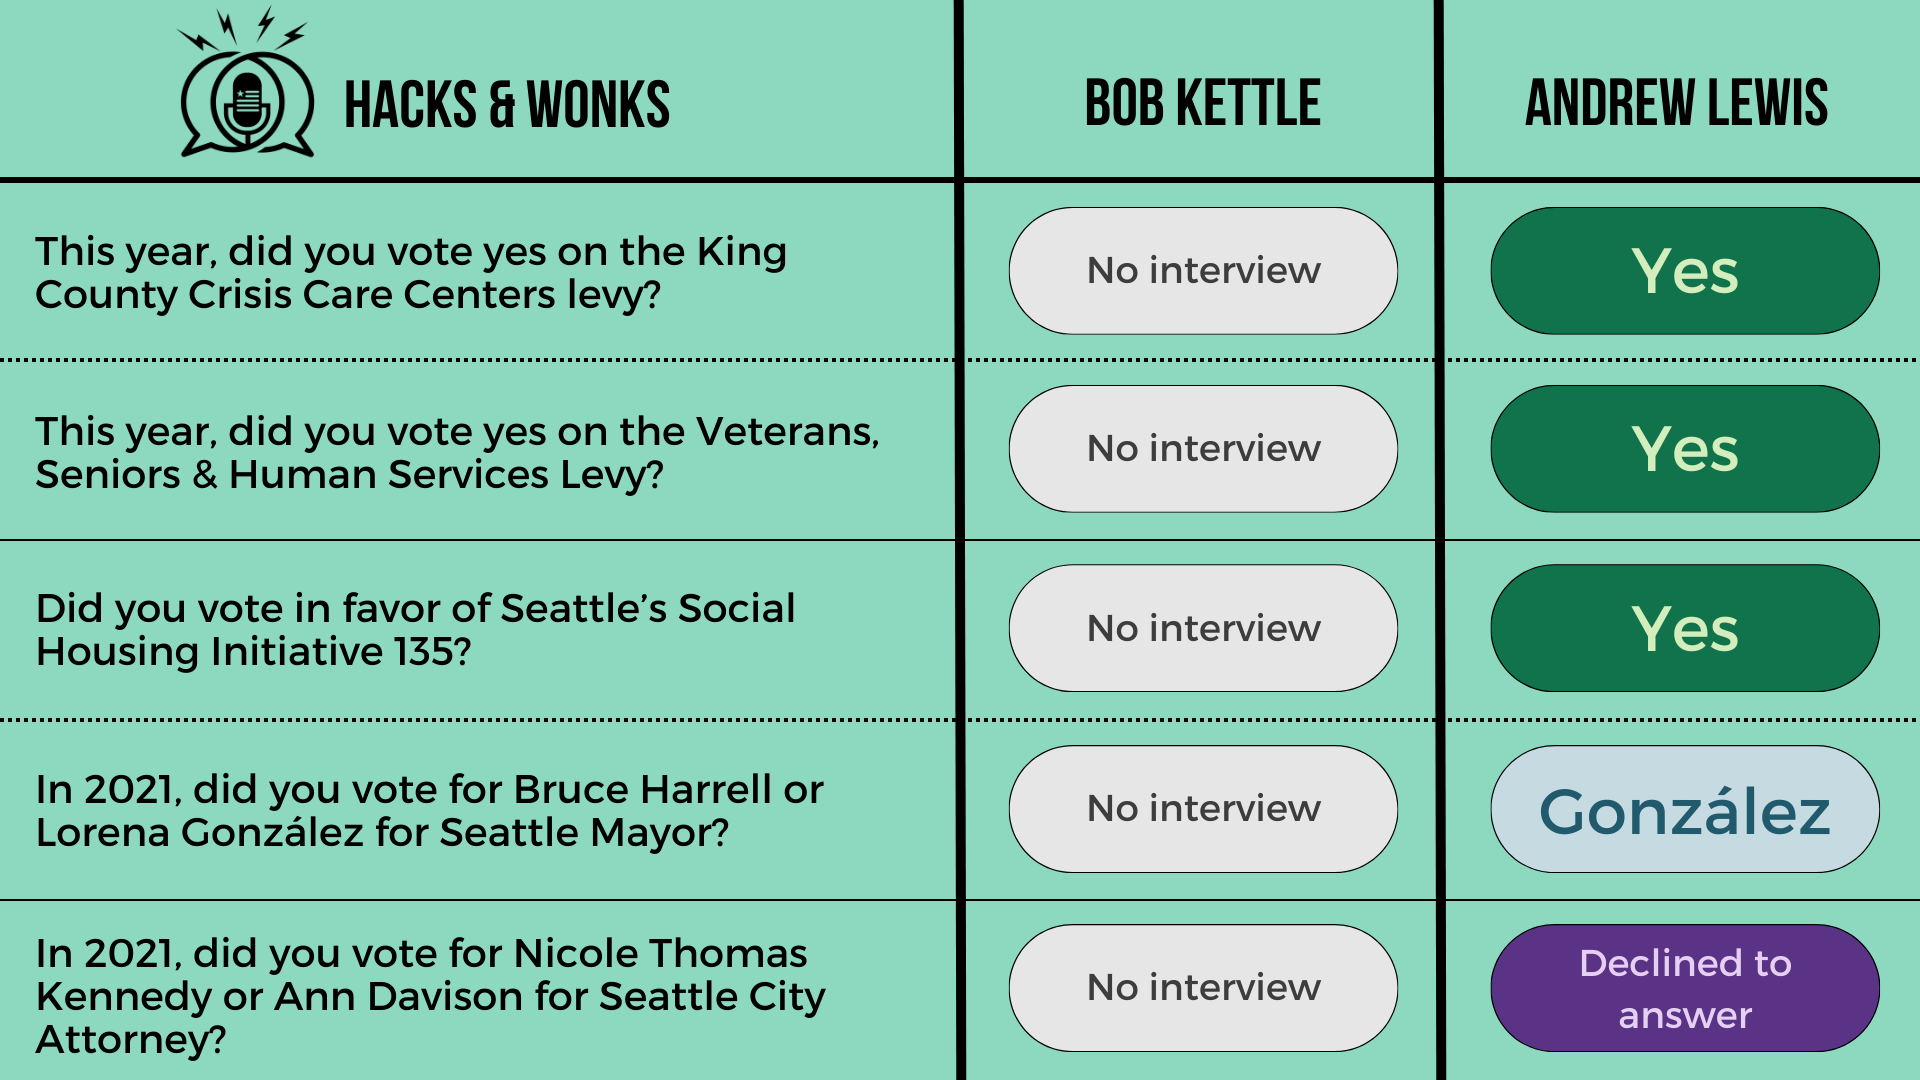 Q: This year, did you vote yes on the King County Crisis Care Centers levy? Bob Kettle: No interview, Andrew Lewis: Yes  Q: This year, did you vote yes on the Veterans, Seniors & Human Services Levy? Bob Kettle: No interview, Andrew Lewis: Yes  Q: Di